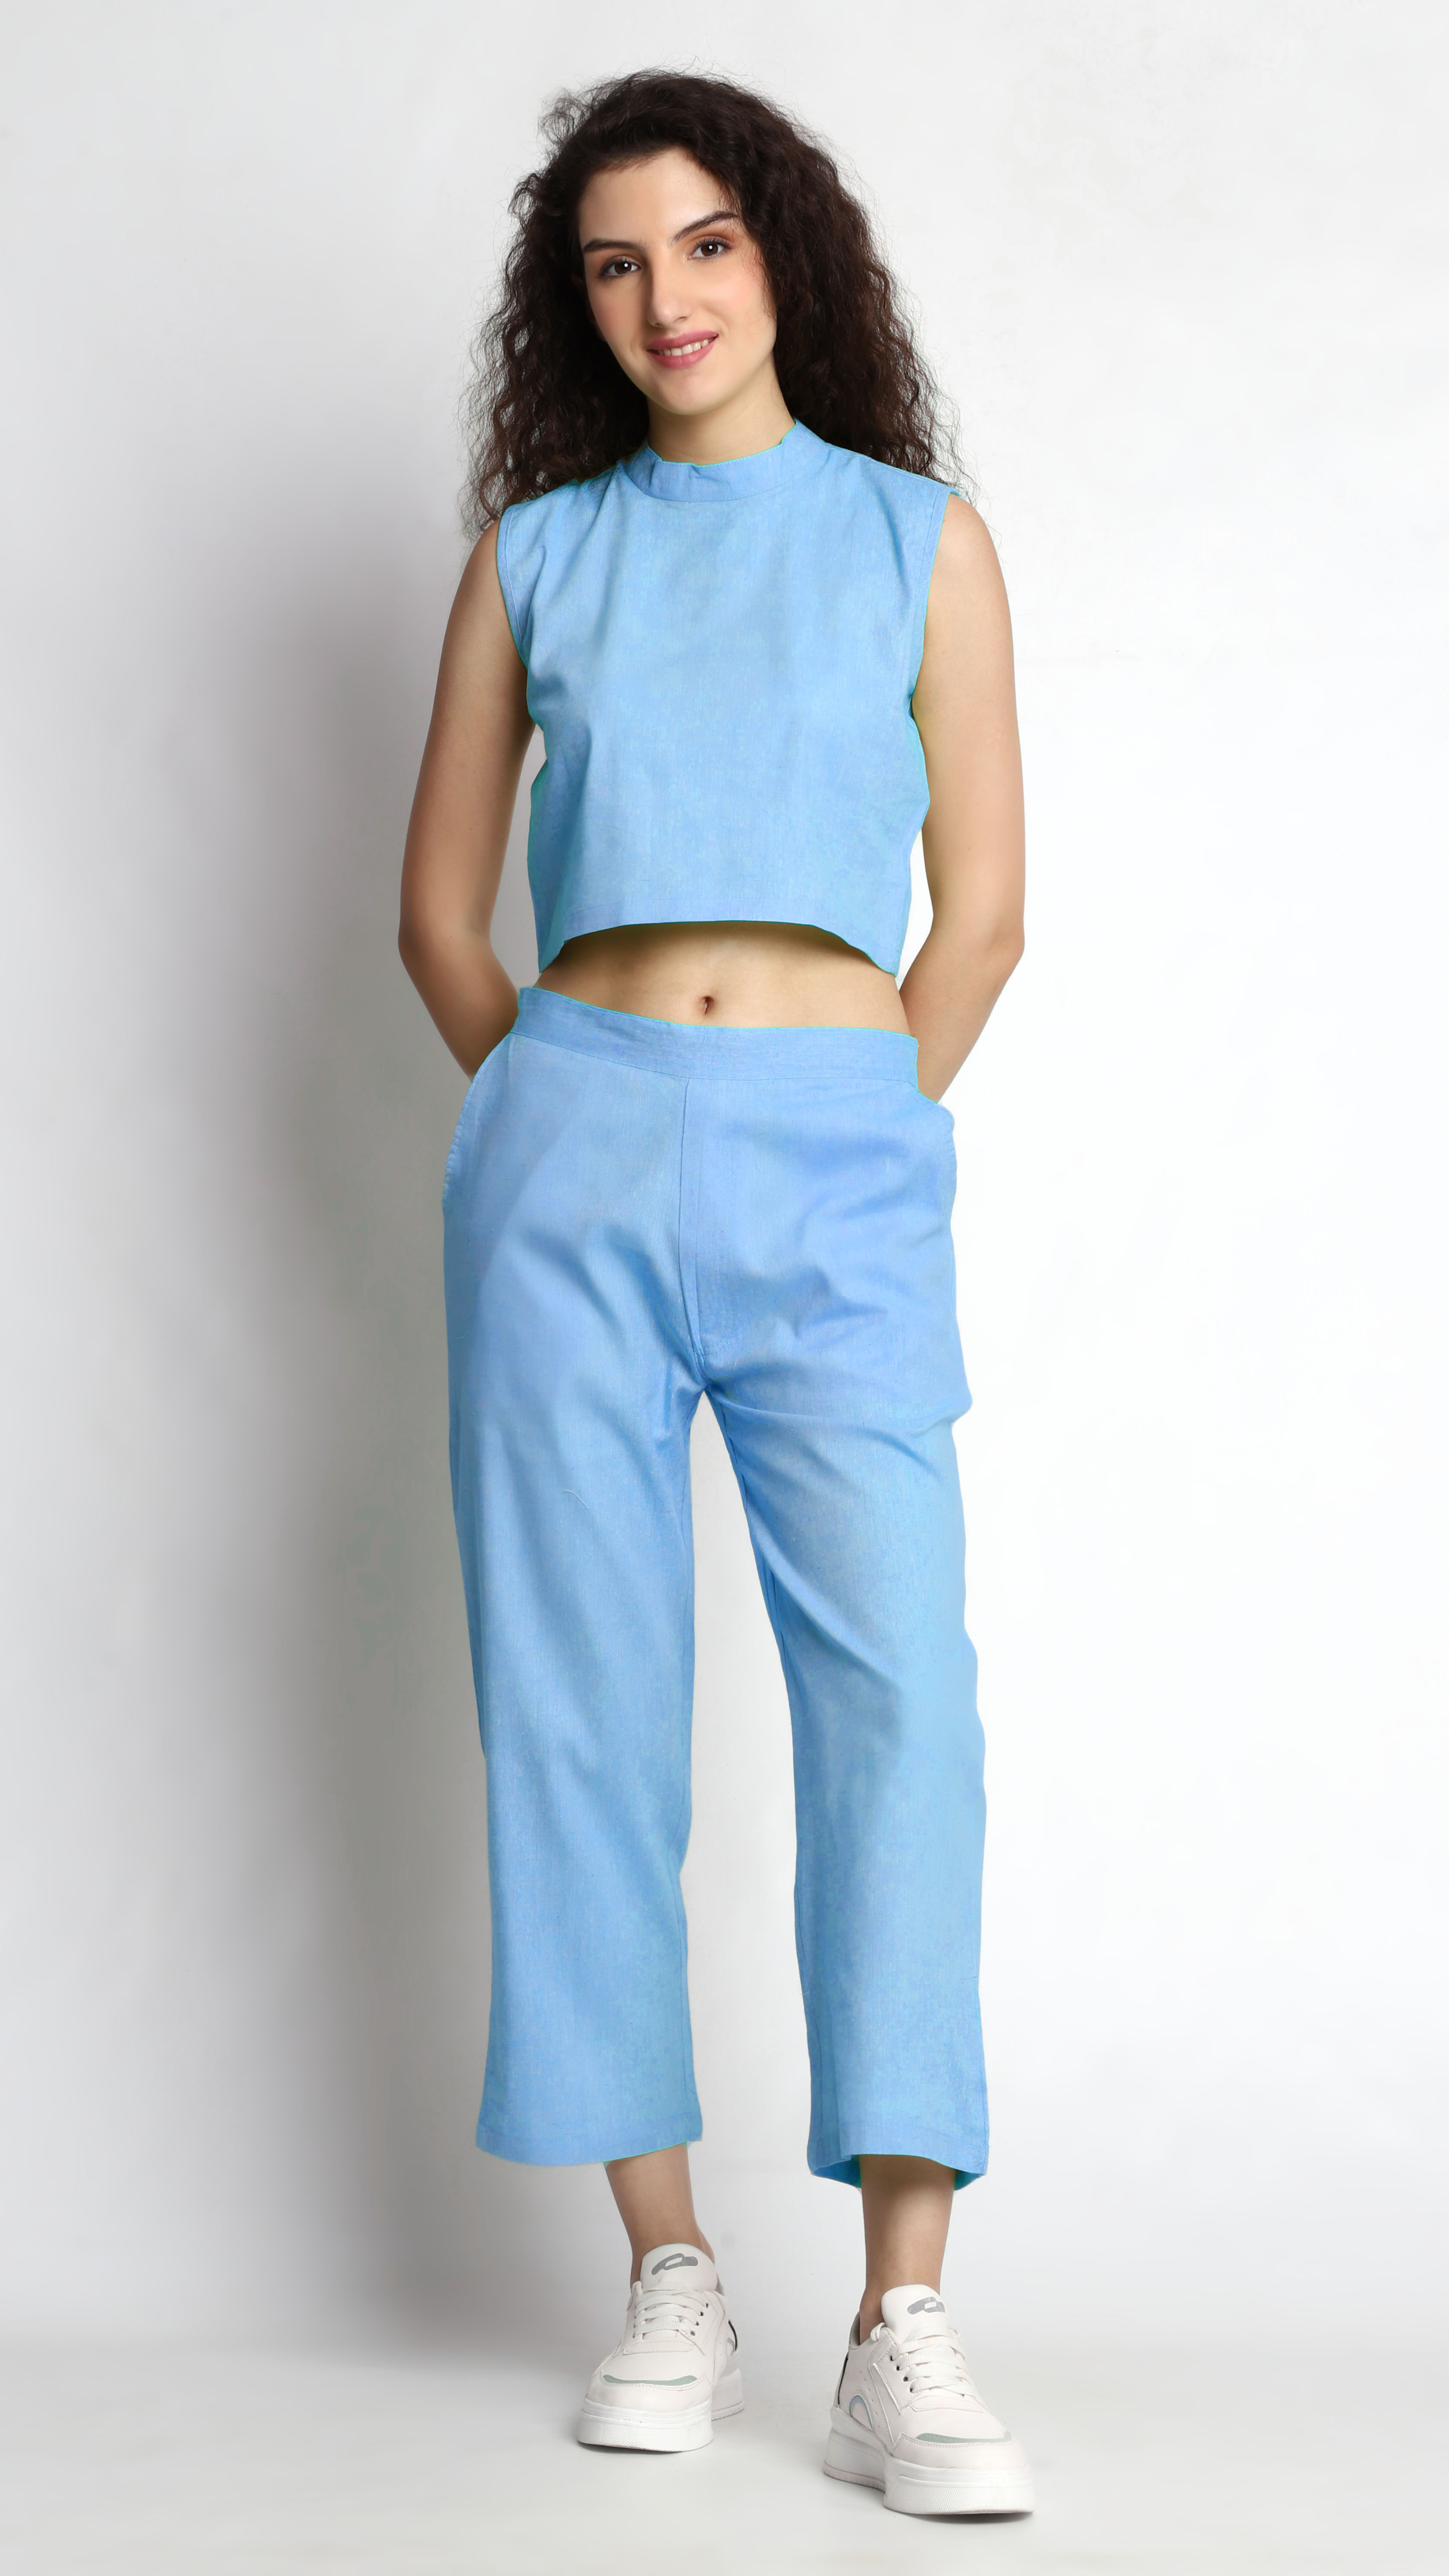 Blue Chic Sleeveless Crop Top Co-ord Set